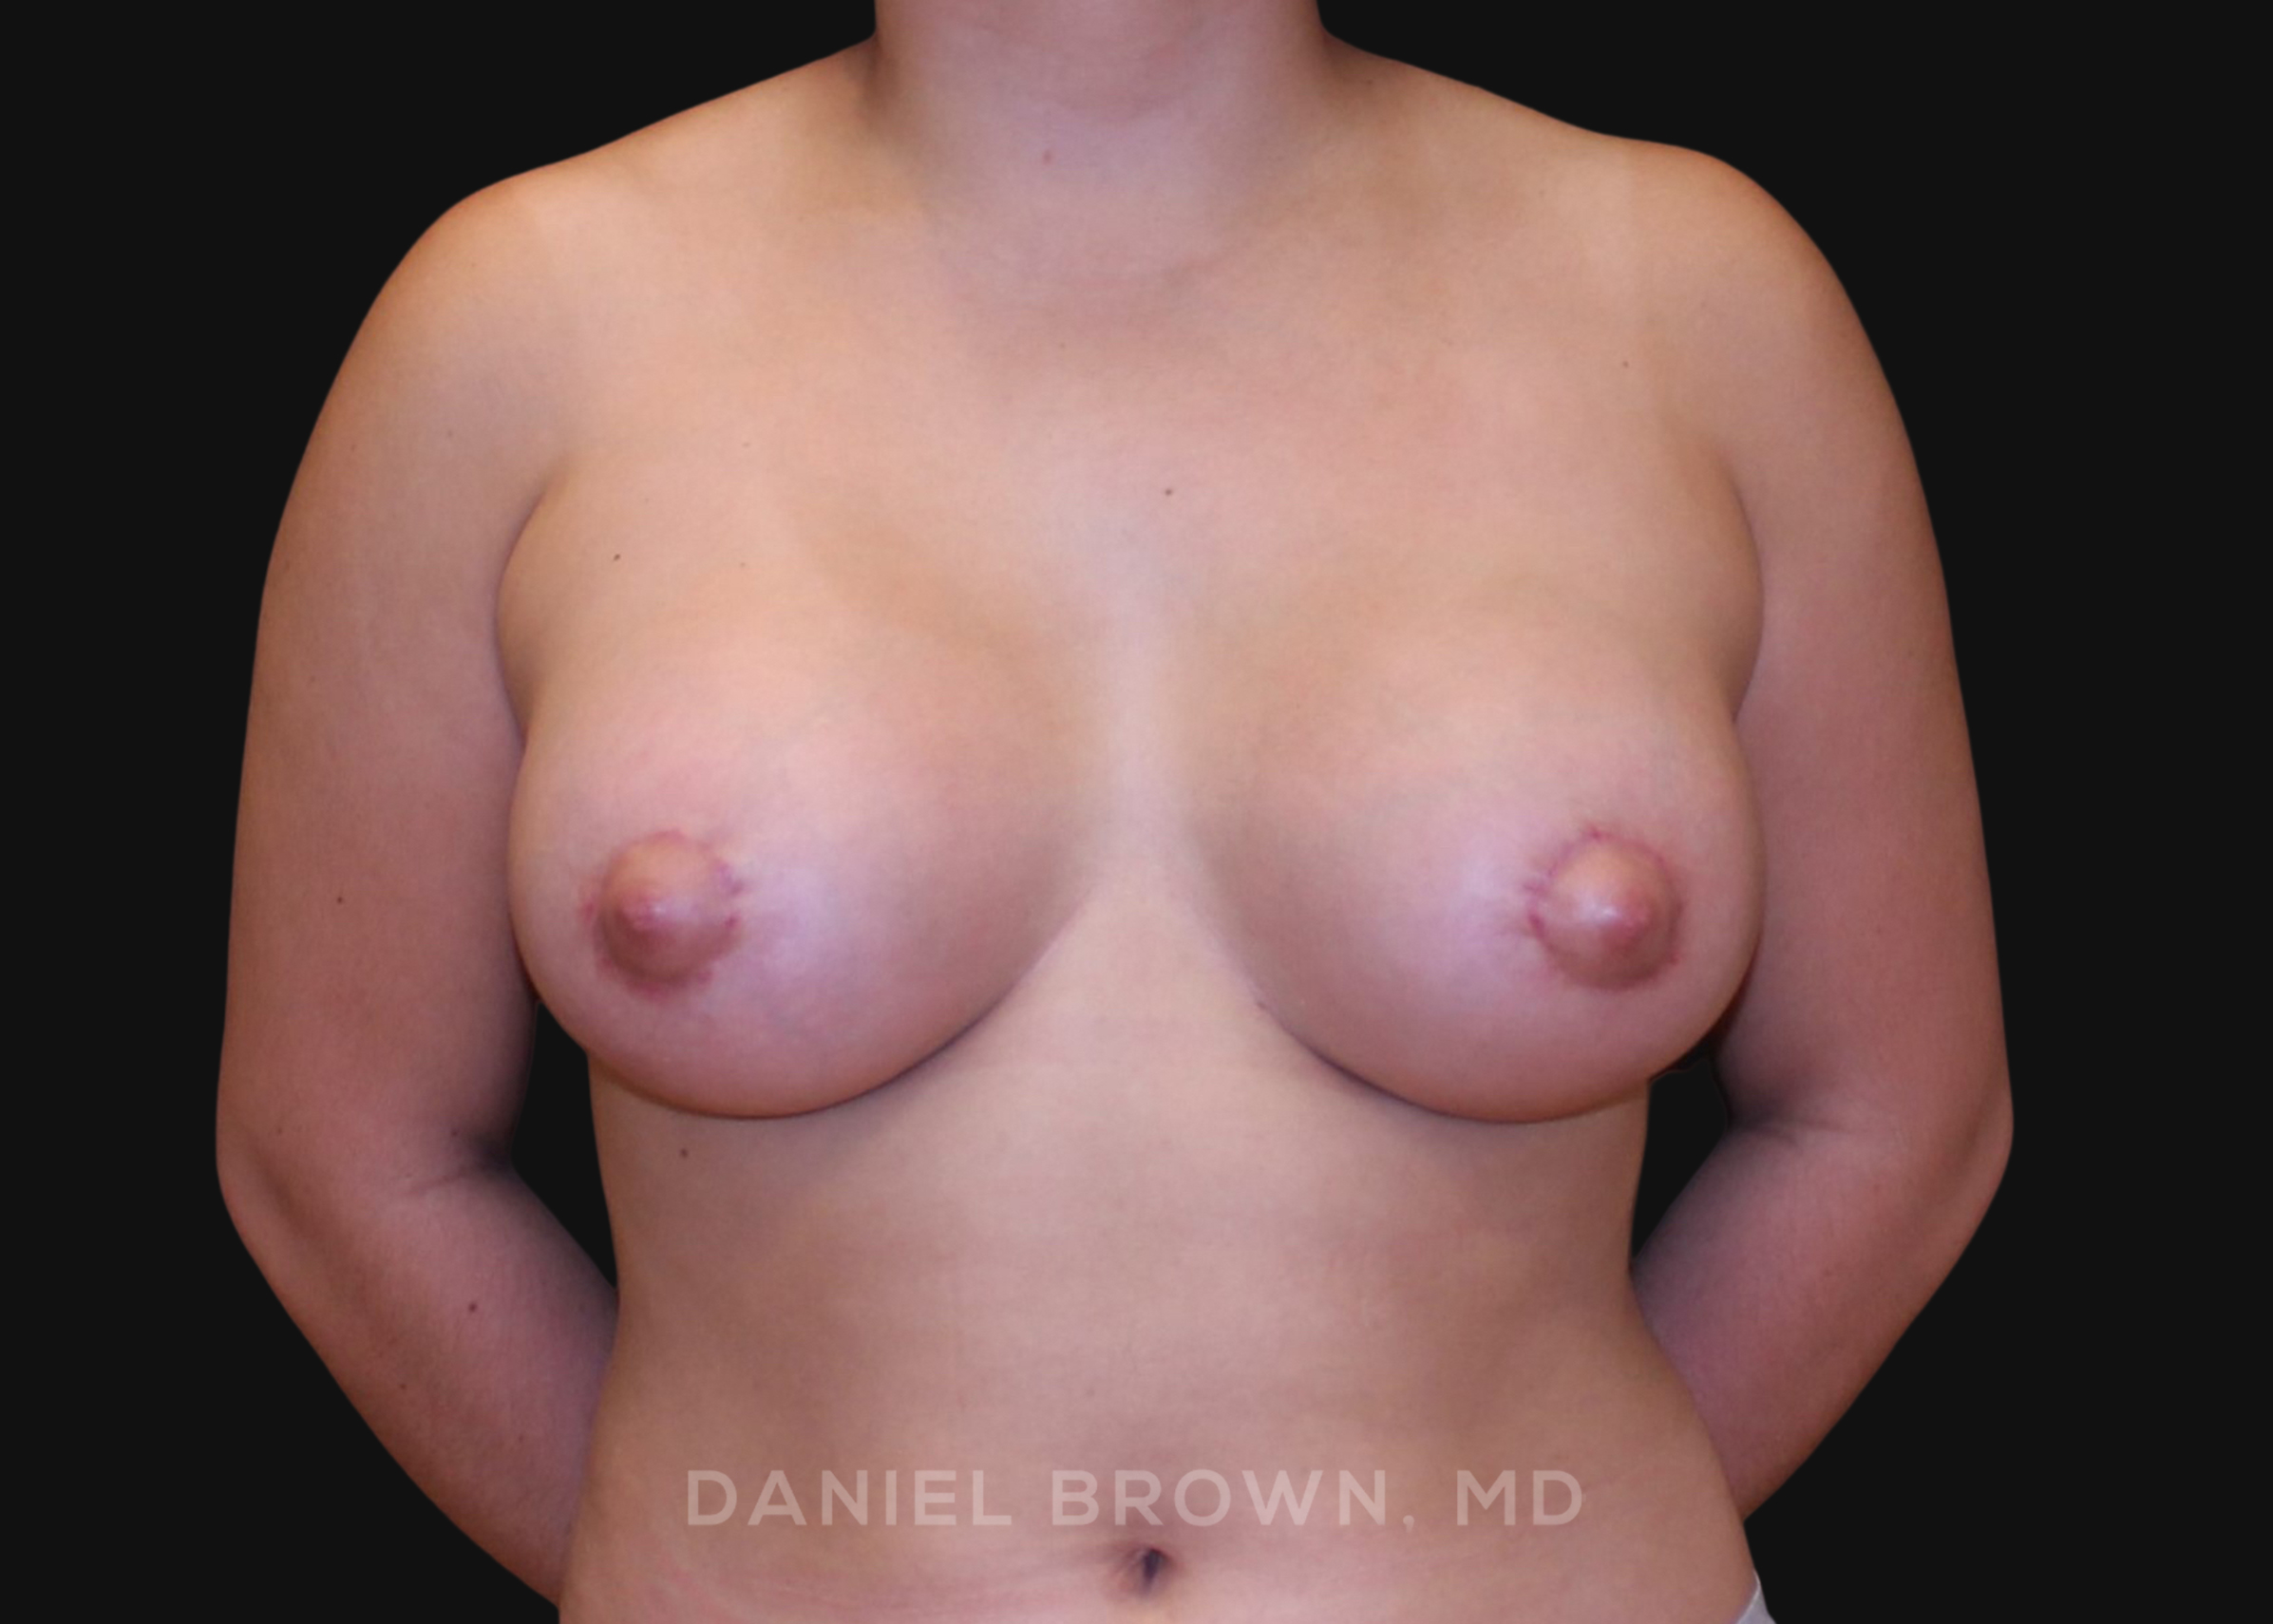 Periareolar Breast Lift/Aug Patient Photo - Case 1326 - after view